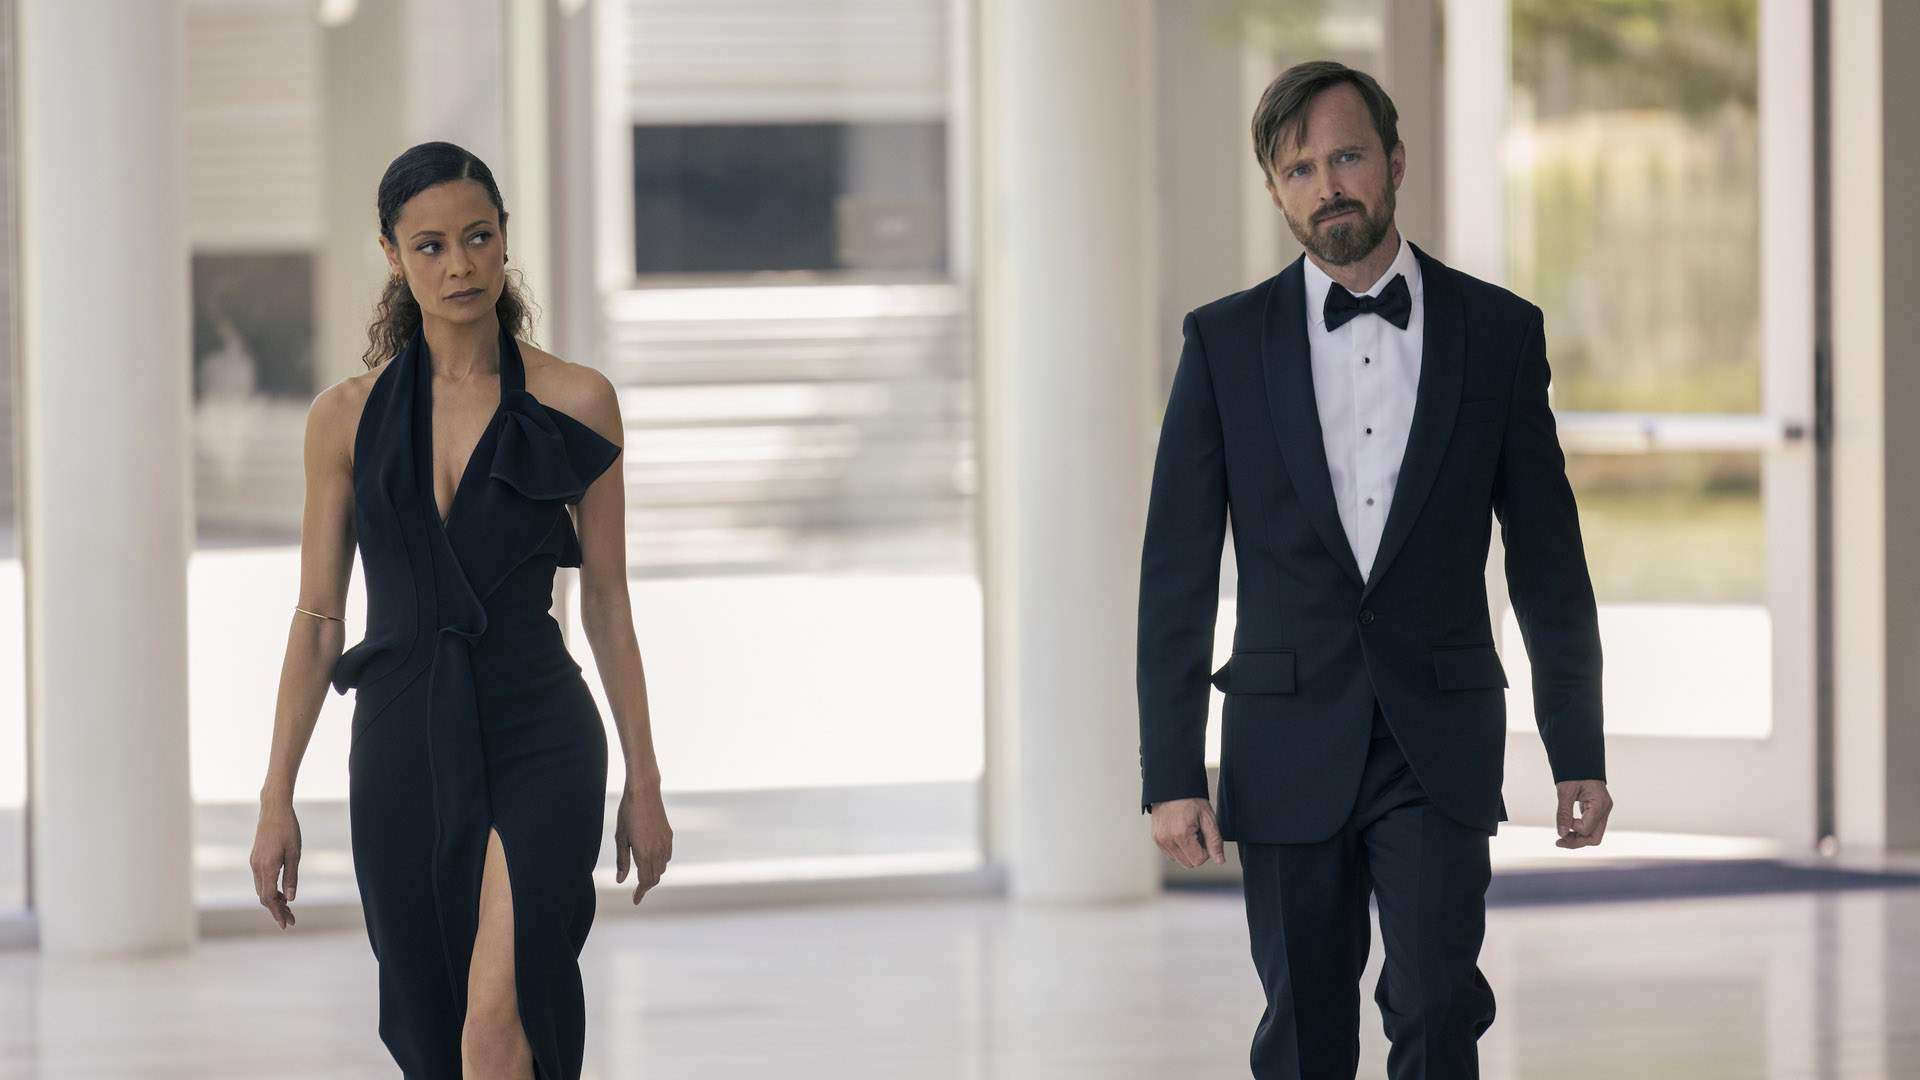 The New 'Westworld' Season Four Trailer Will Get You Questioning the Nature of Your Own Reality